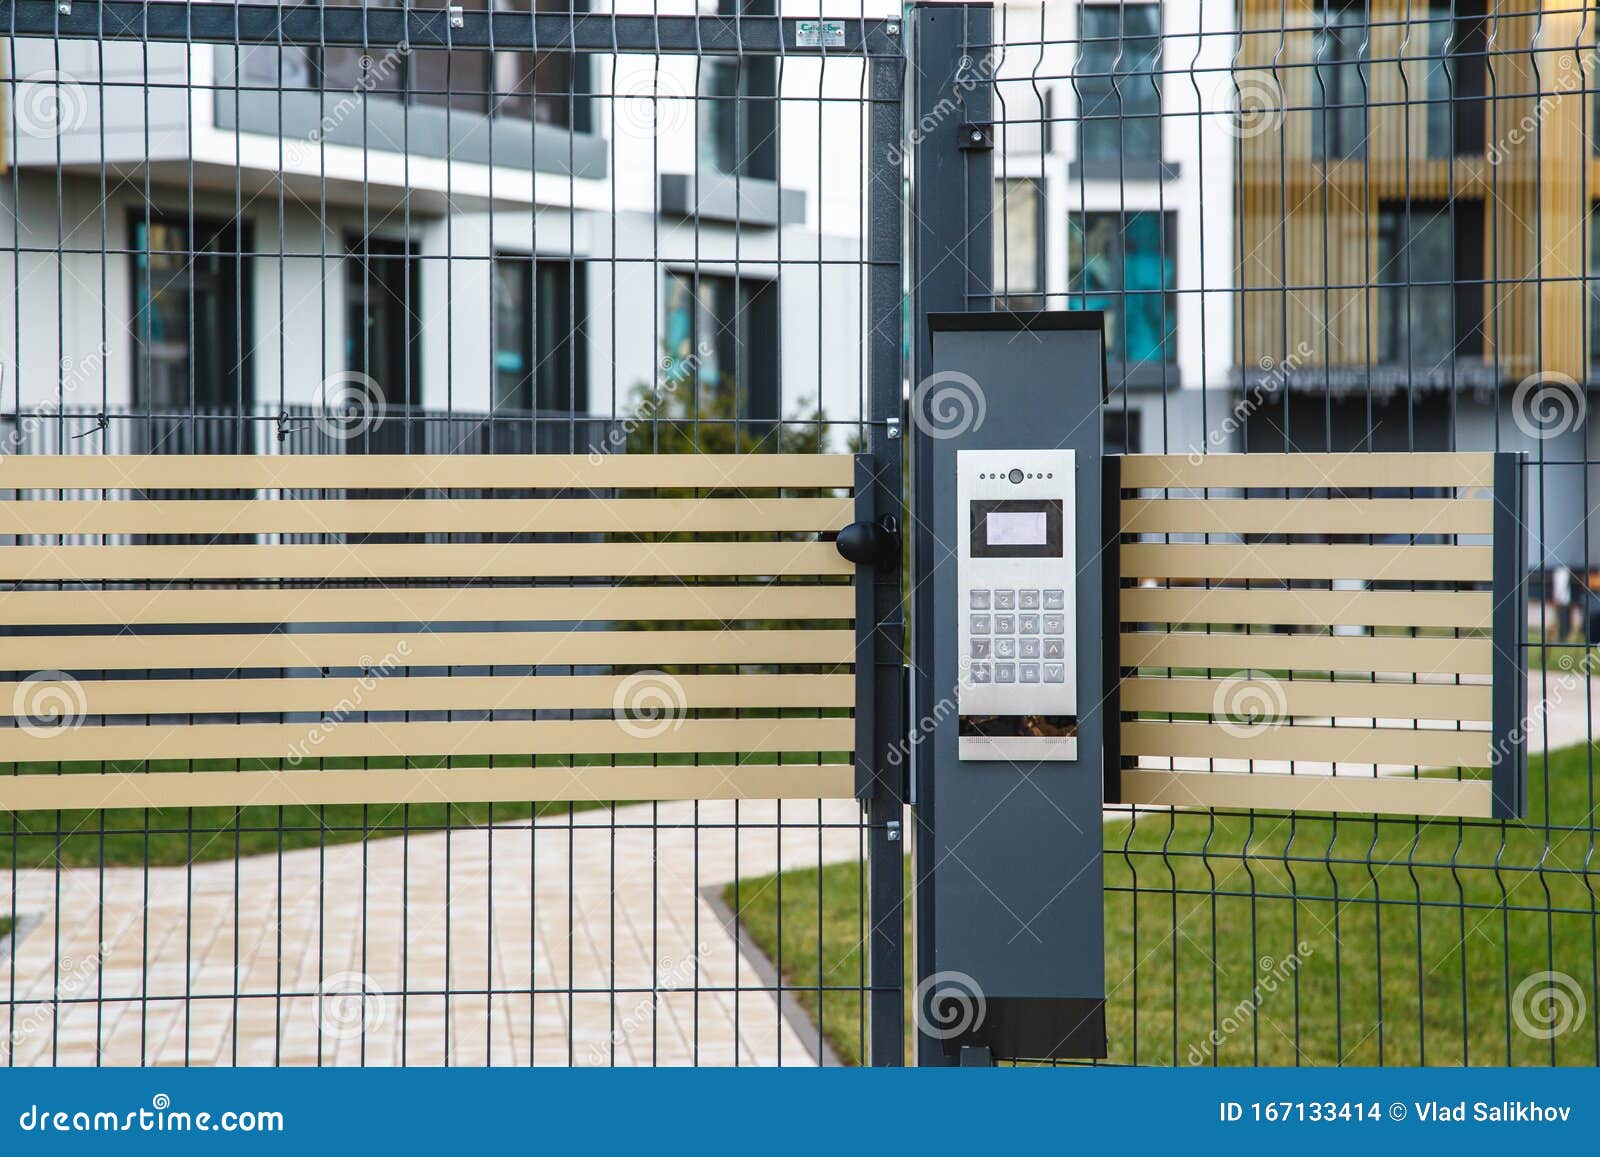 video intercom on the gate at the entrance to the residential area